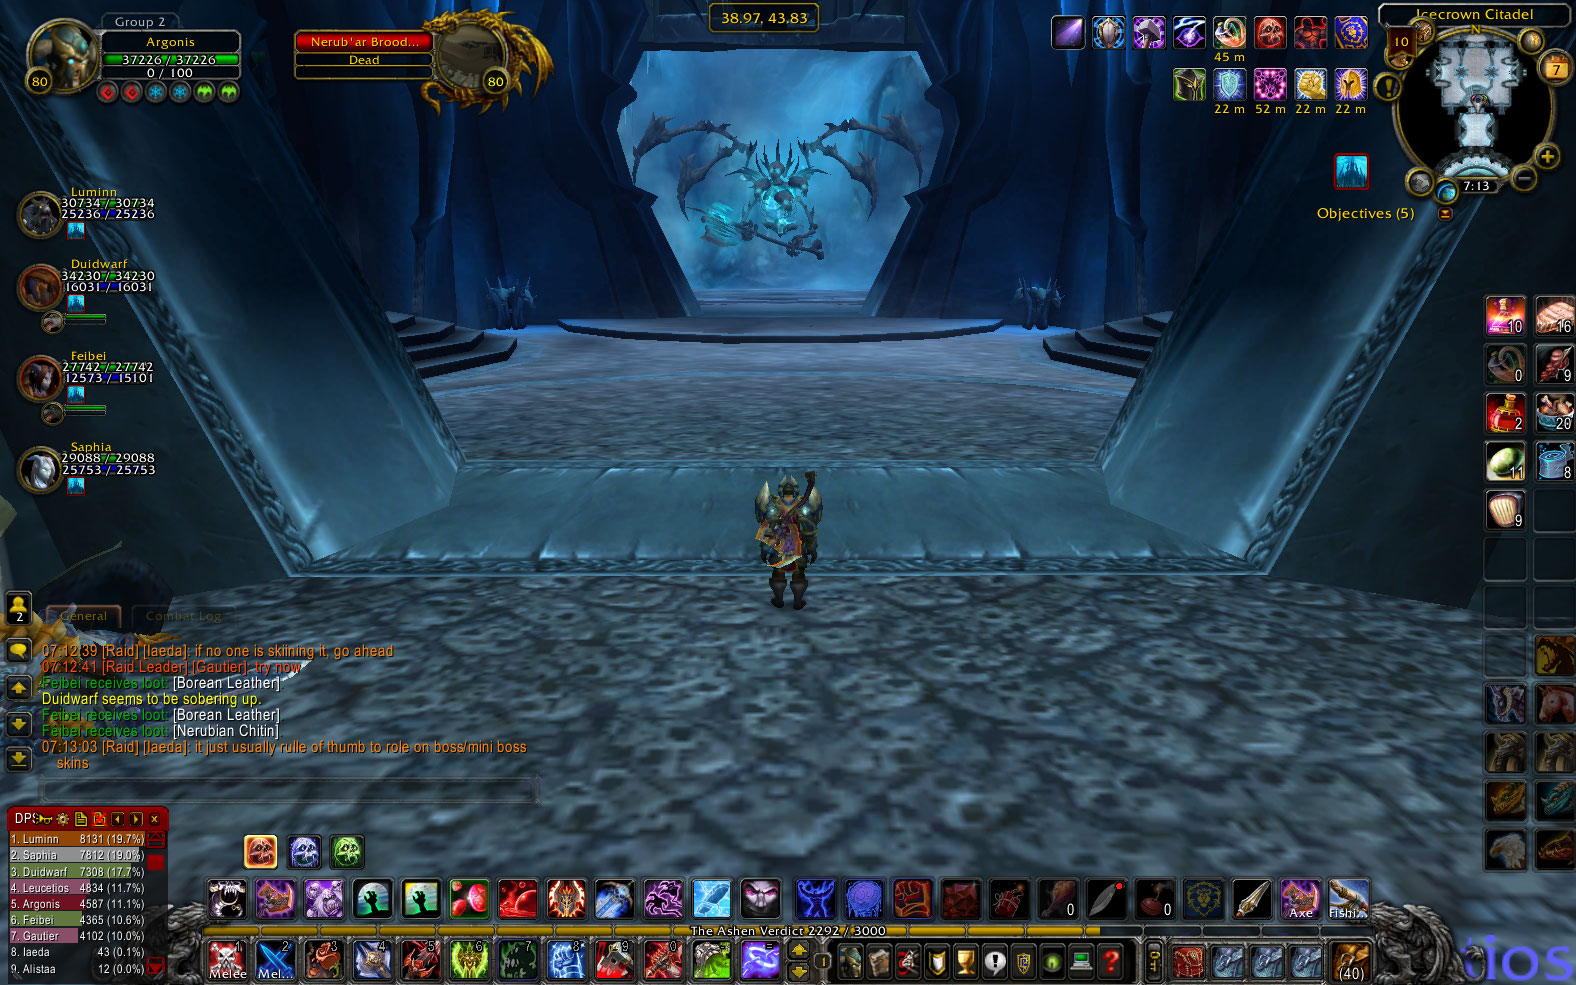 First time in Icecrown Citadel